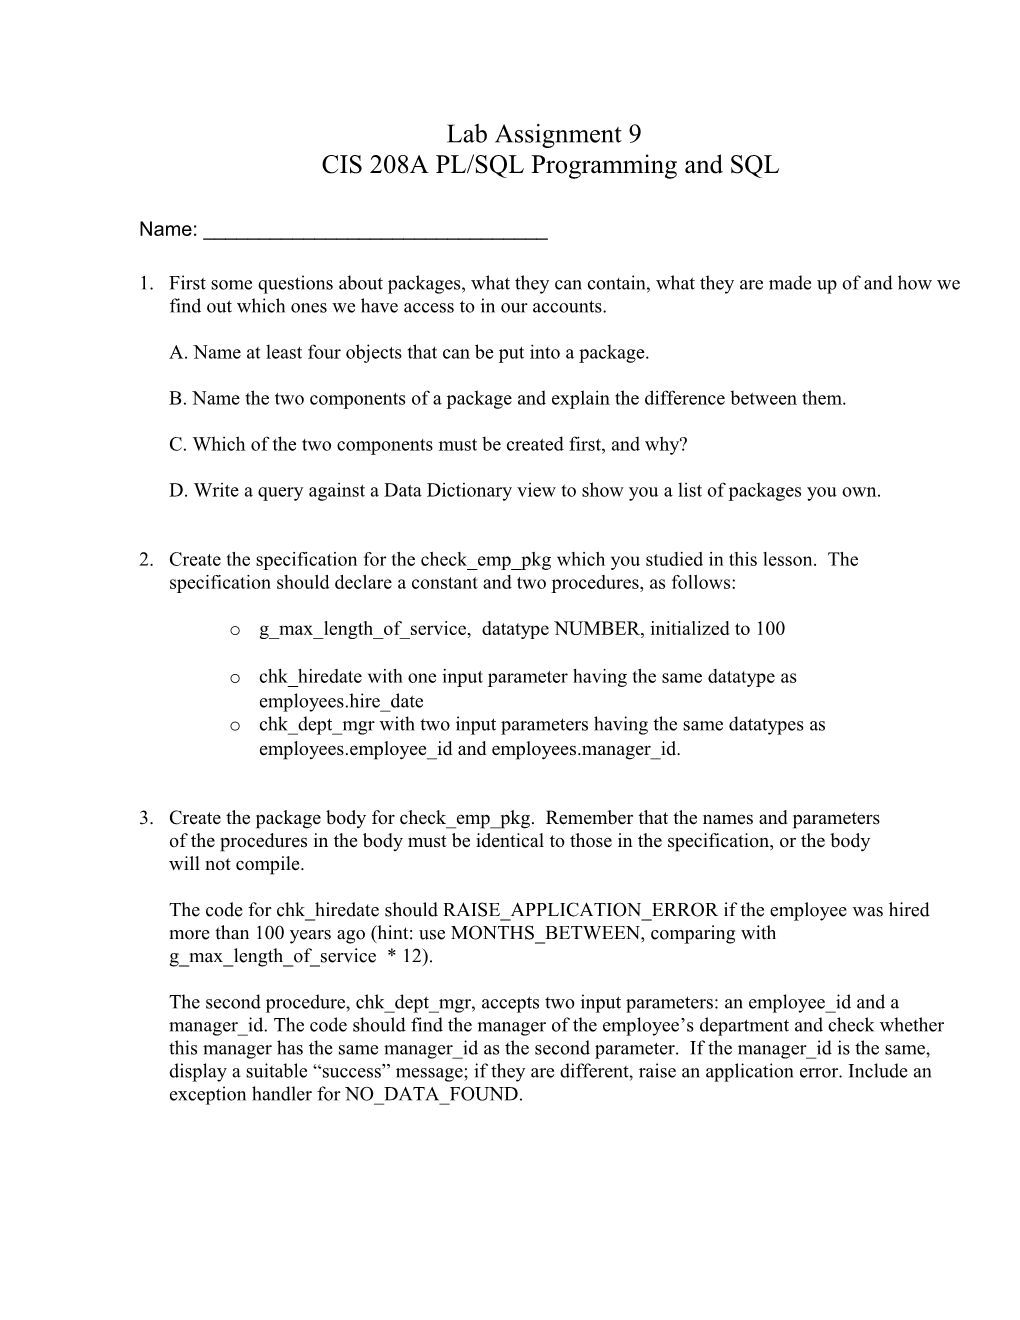 Lab Assignment 9 CIS 208A PL/SQL Programming and SQL